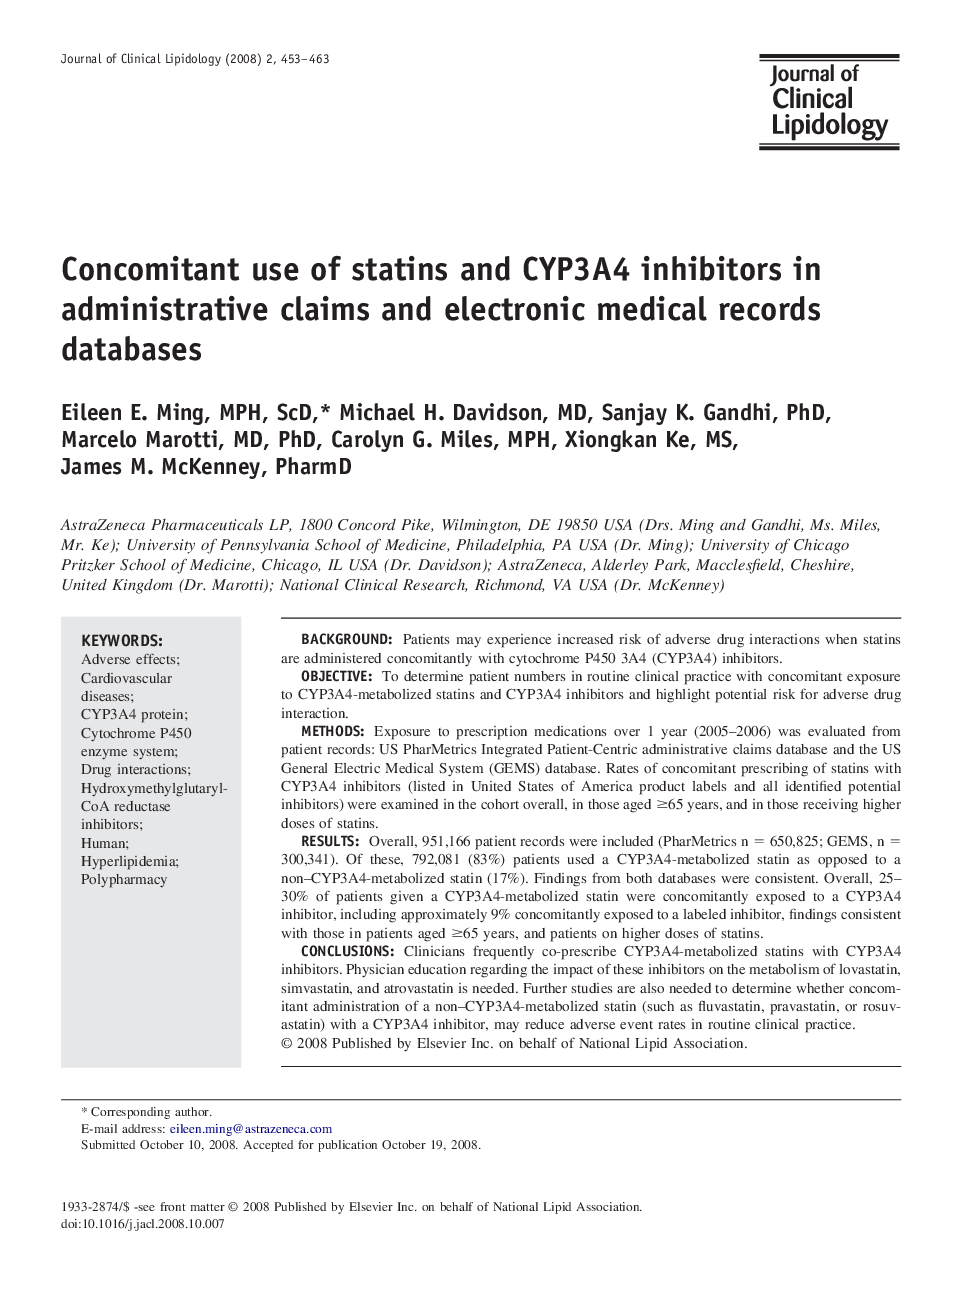 Concomitant use of statins and CYP3A4 inhibitors in administrative claims and electronic medical records databases